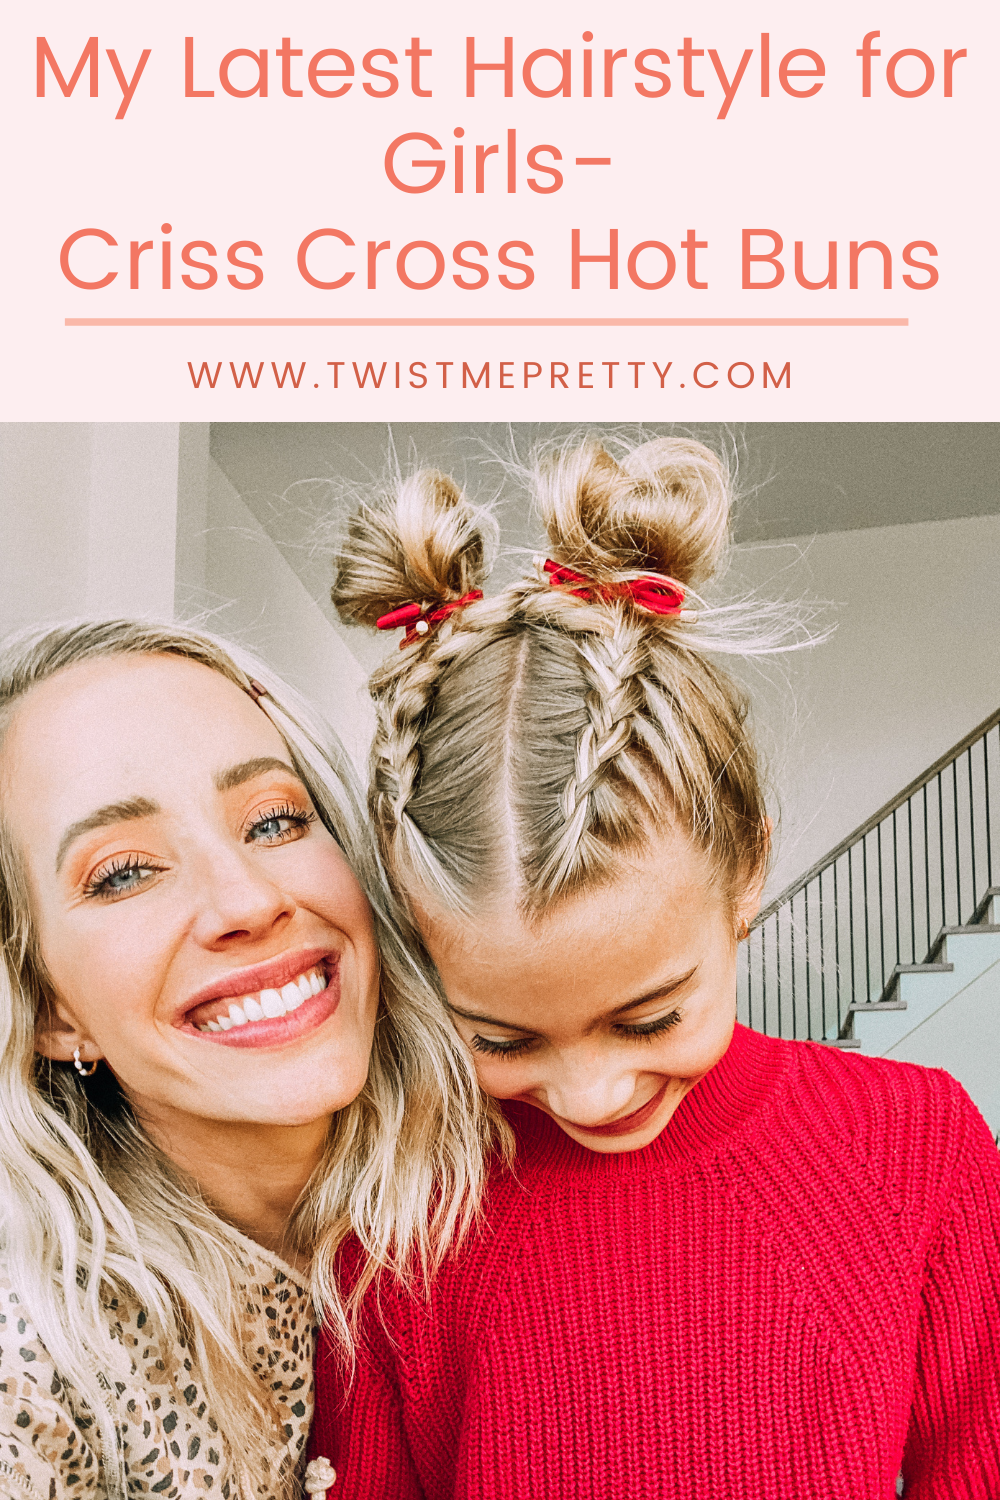 My latest hairstyle for little girls- Criss Cross Hot Buns www.twistmepretty.com